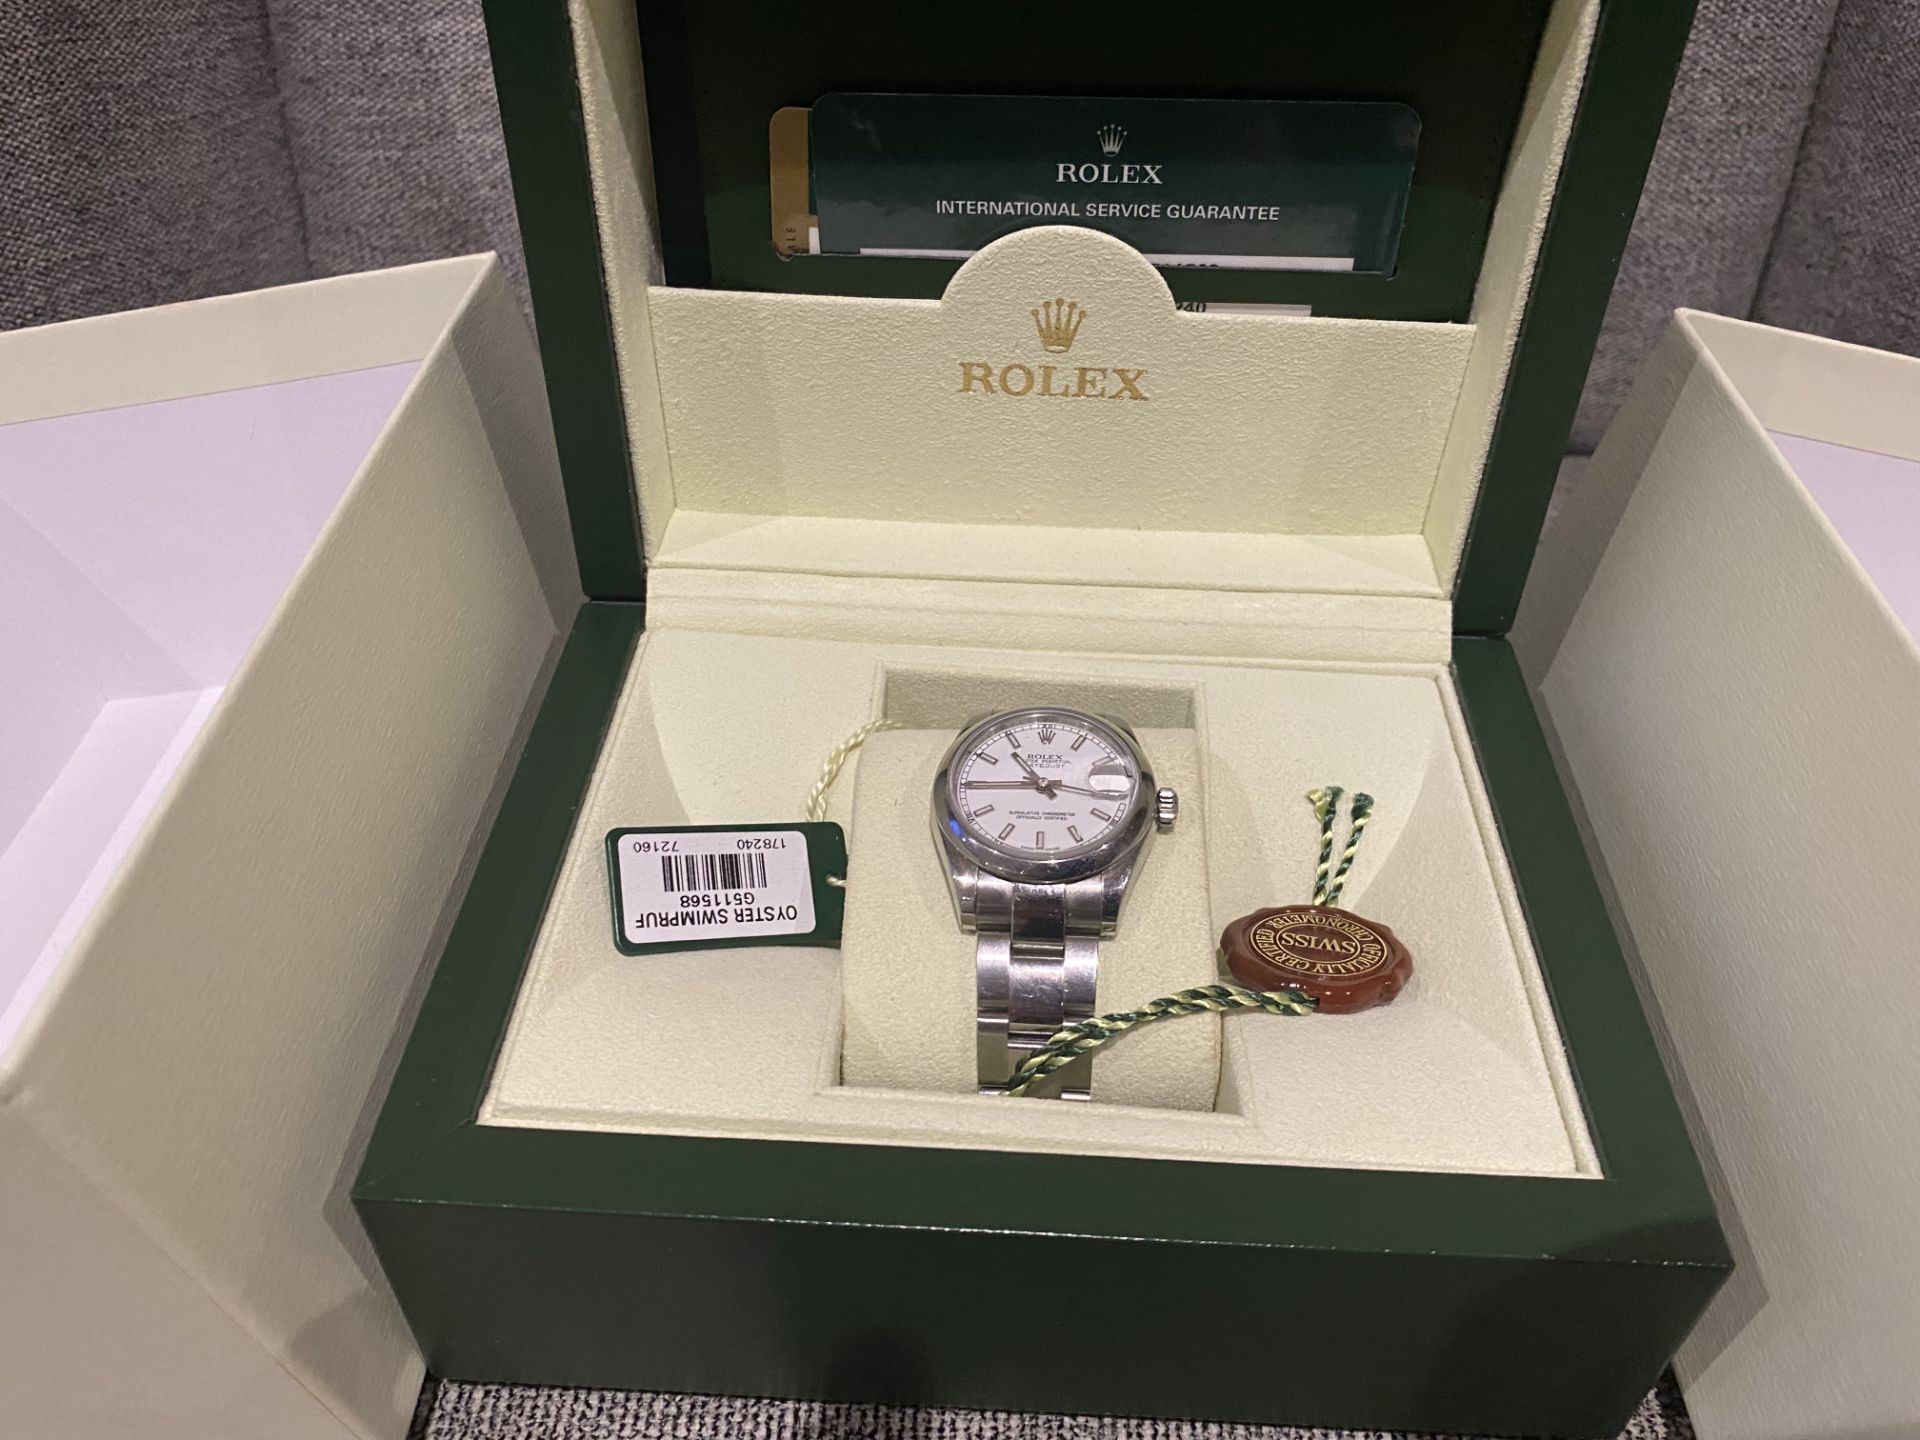 ROLEX DATEJUST OYSTERSTEEL- ORIGINAL BOX AND WARRANTY CARD!!! WHITE DIAL - NO VAT !!!!! - BUY ME!! - Image 2 of 3